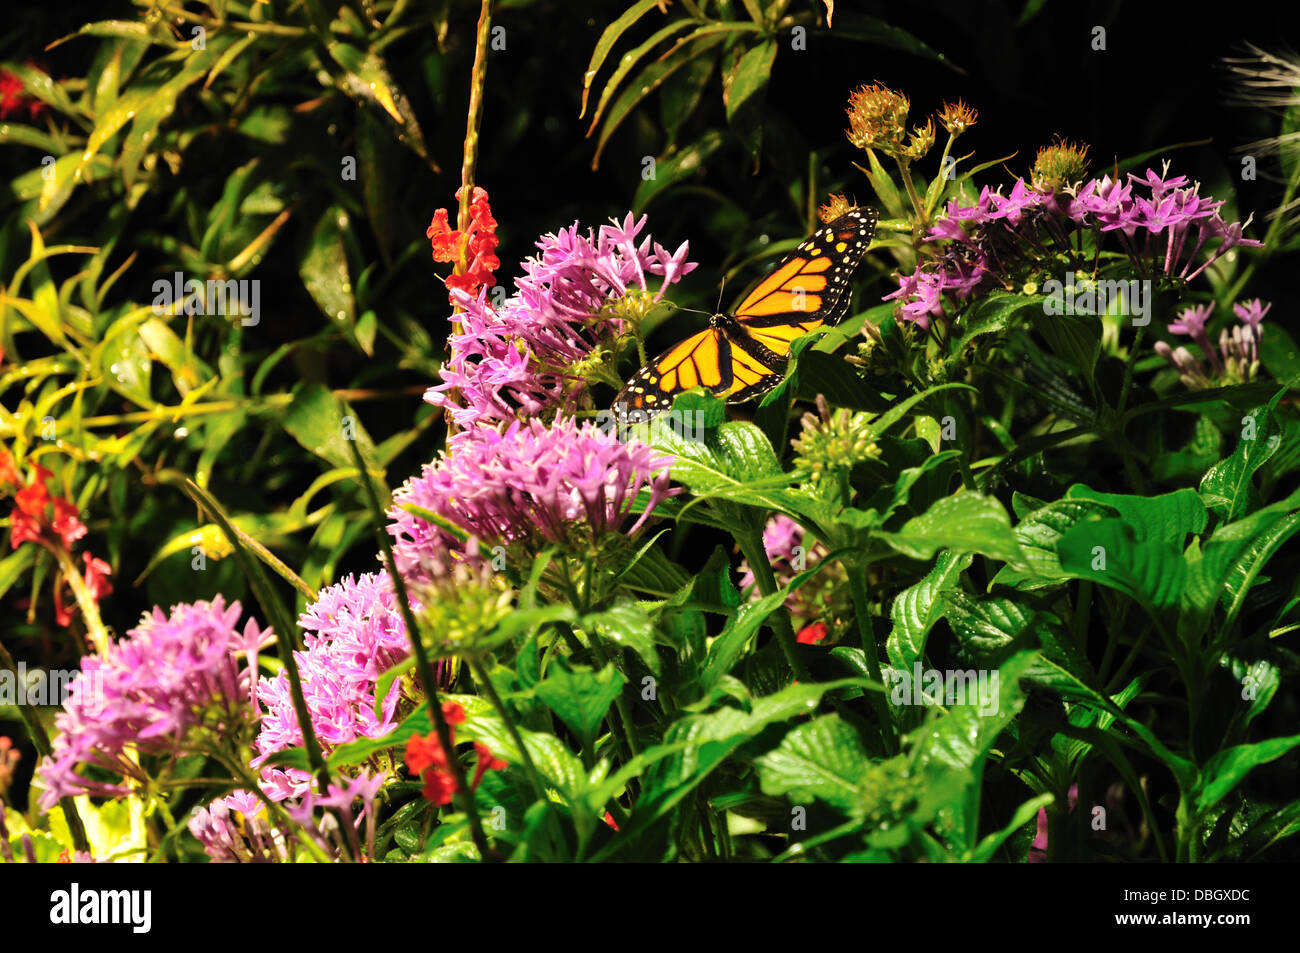 A Monarch Butterfly In The Butterfly Garden Of The Science Museum